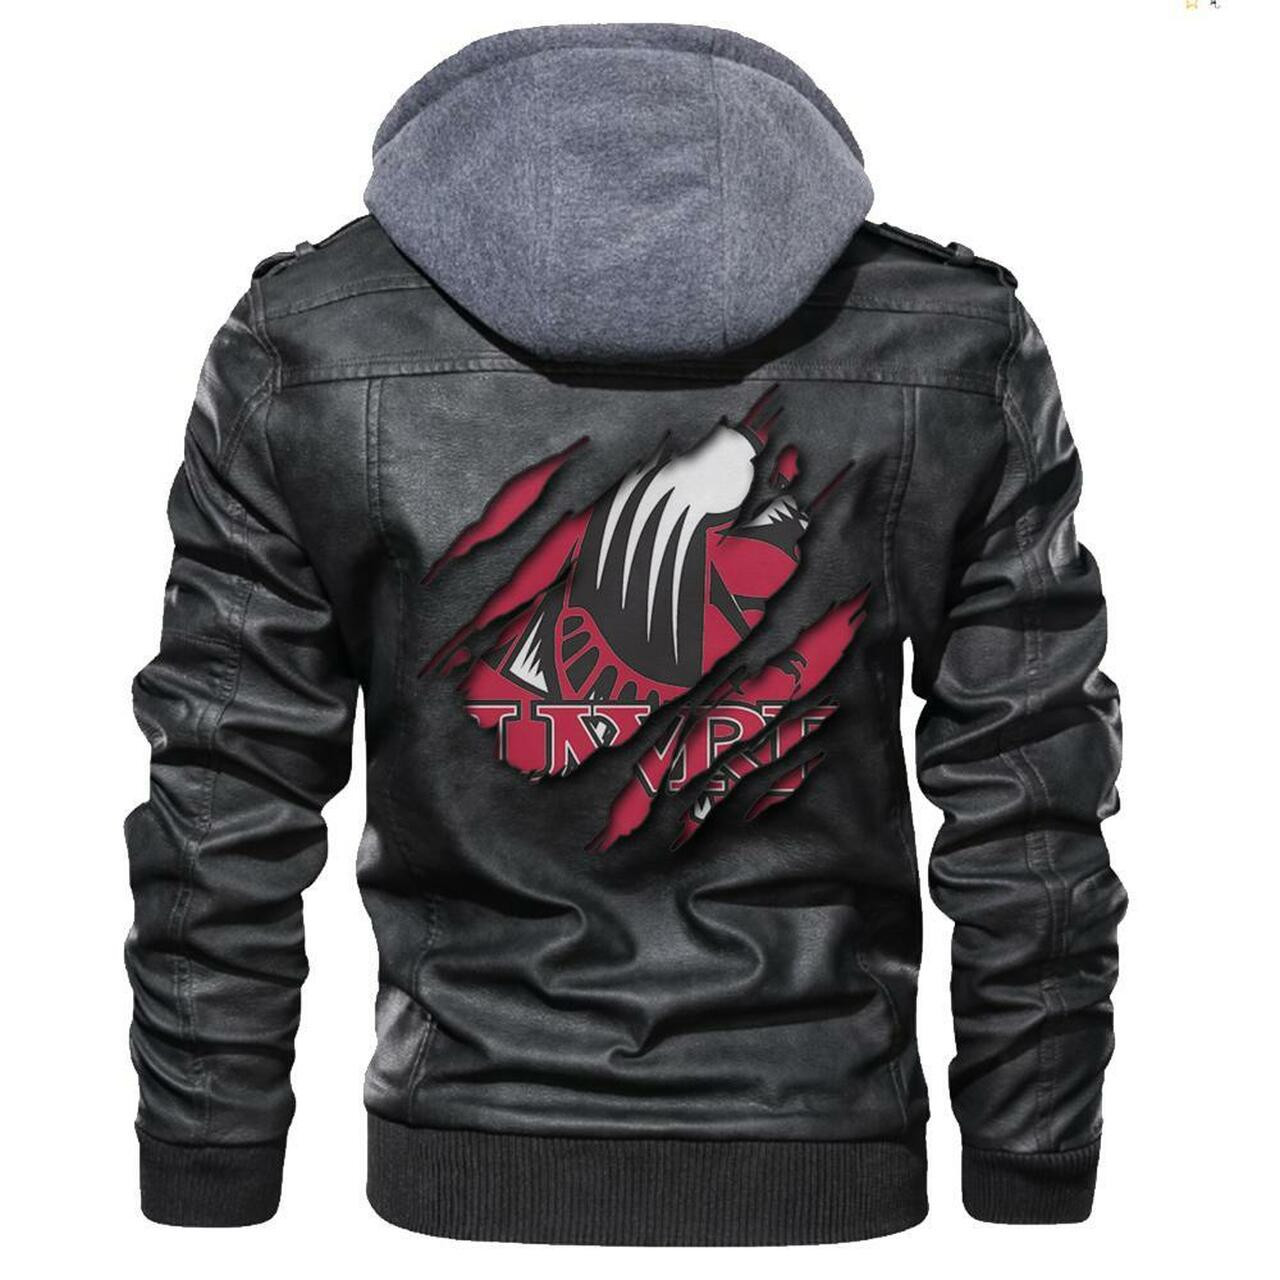 Don't wait another minute, Get Hot Leather Jacket today 36